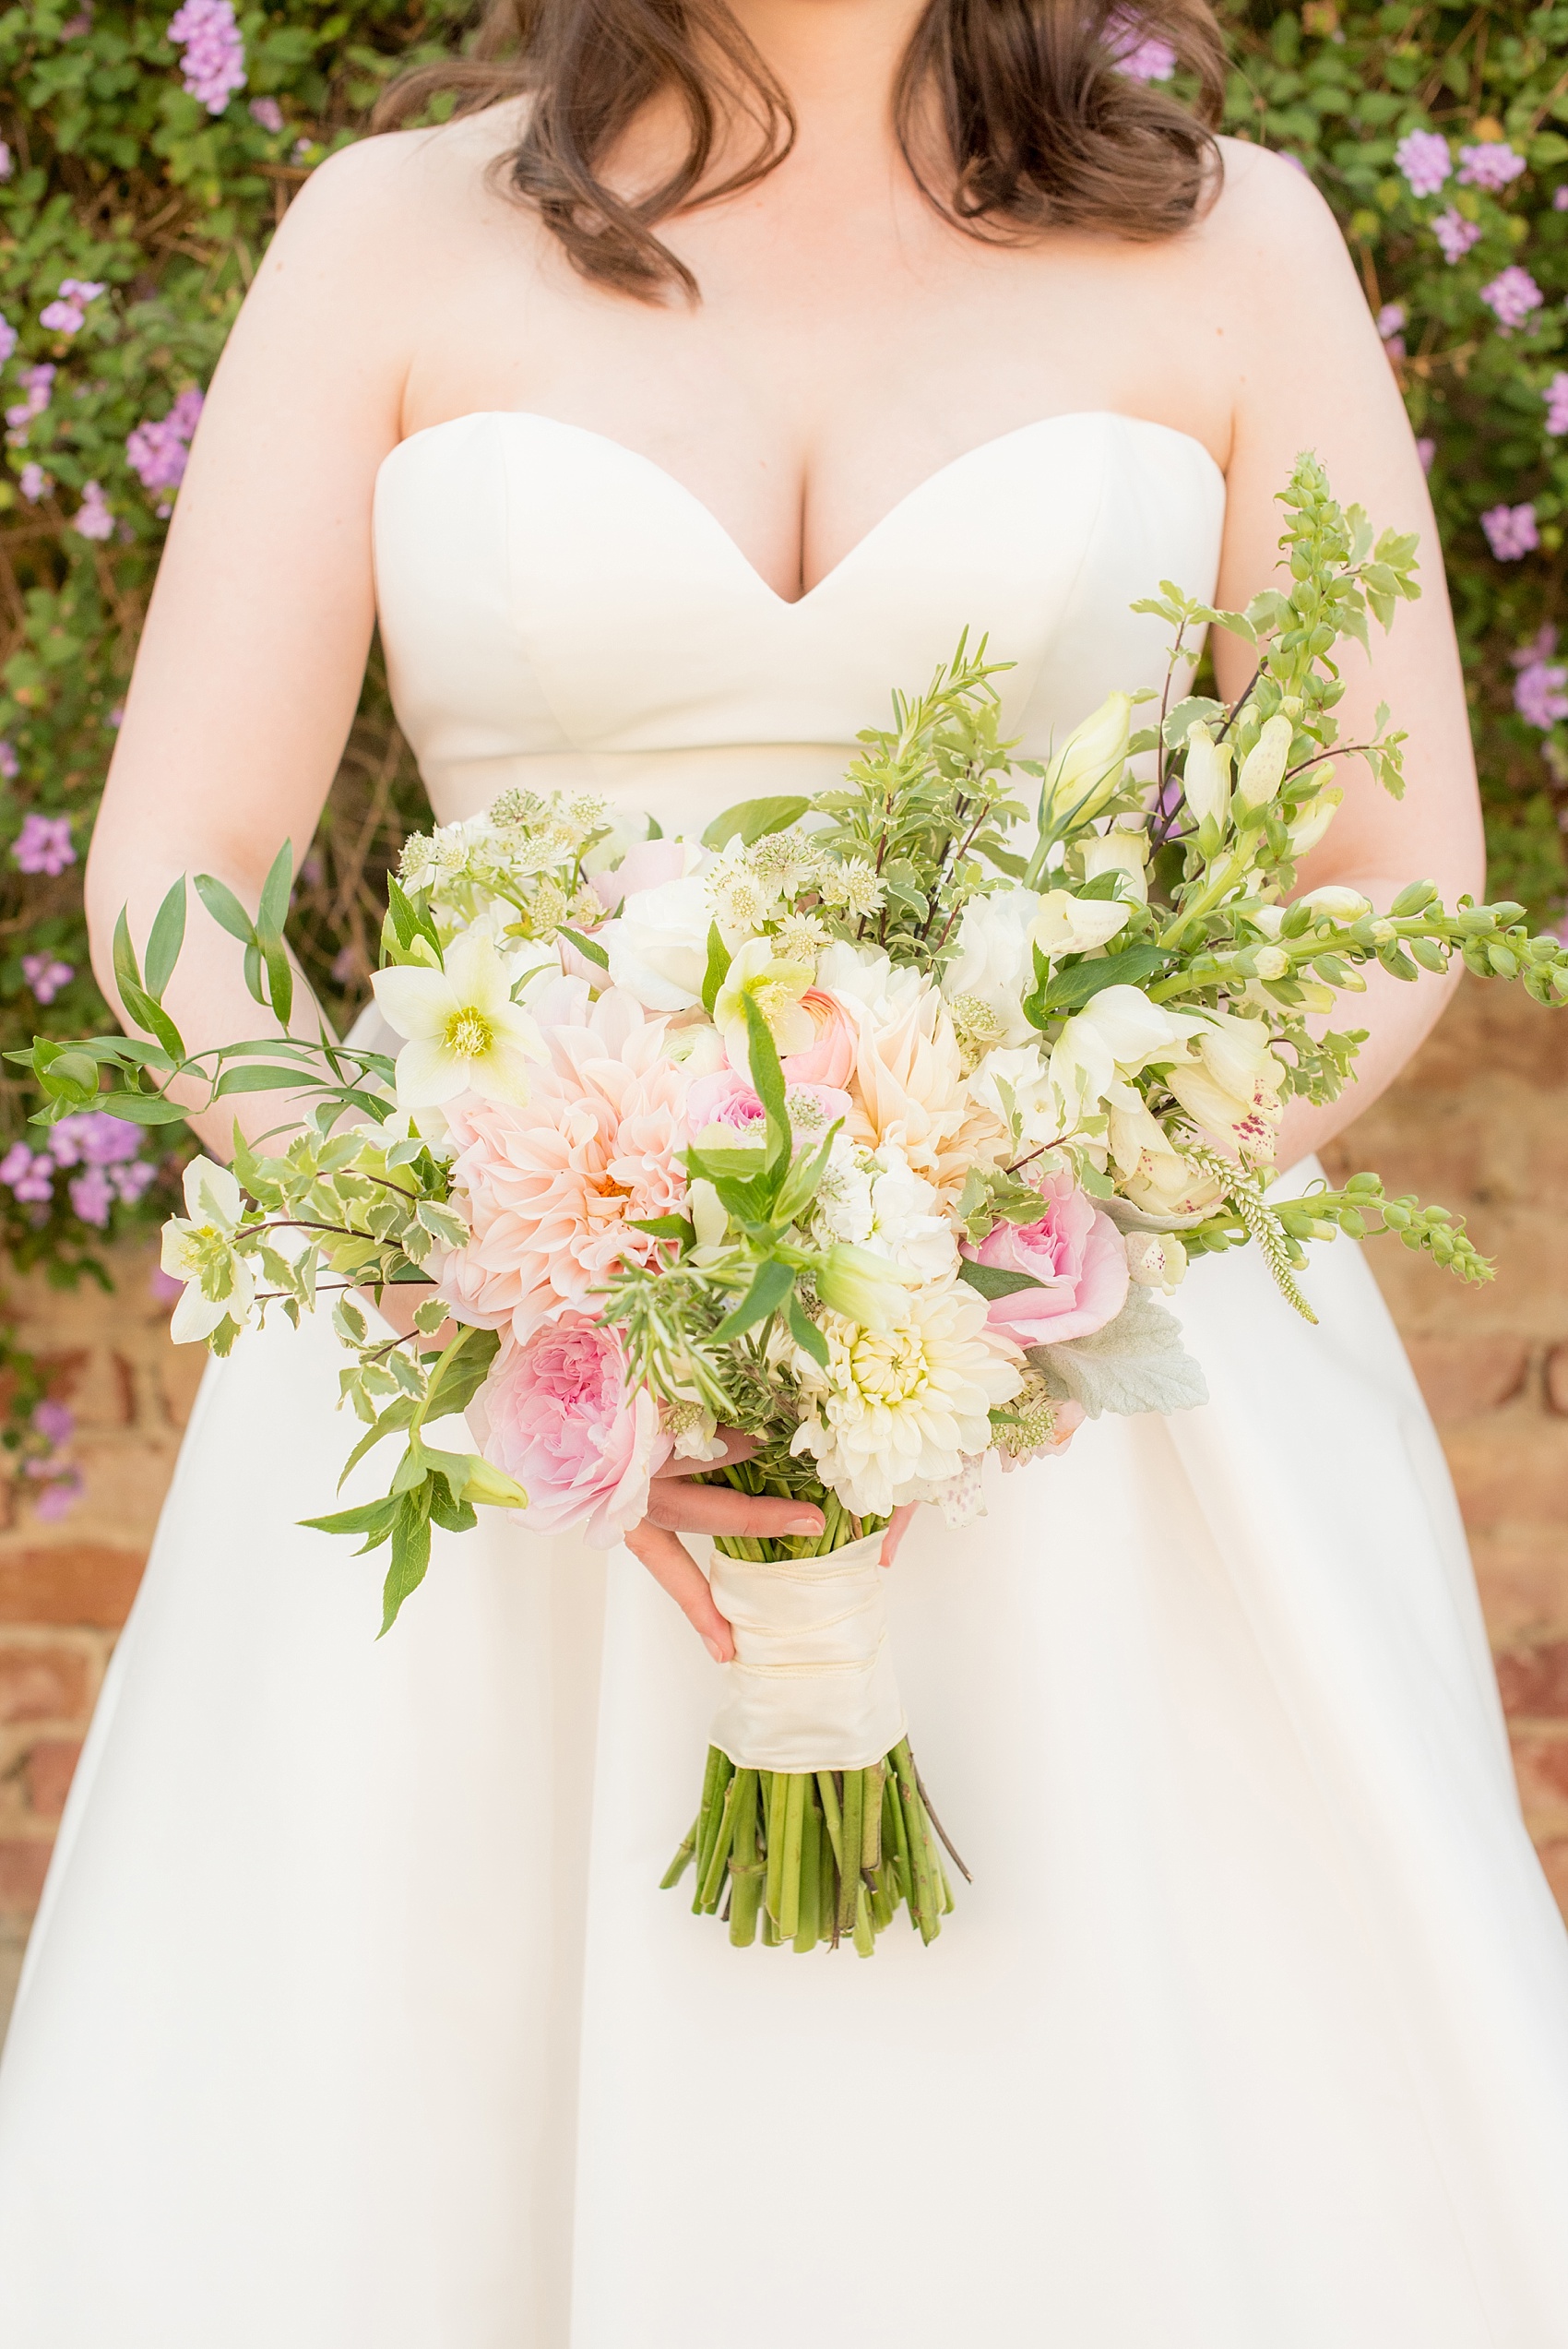 Mikkel Paige Photography photo of the bride's pink and green bridal bouquet for her wedding at Testarossa Winery in California, with garden roses, Dusty Miller, Veronica, Dahlias and Hellebore.